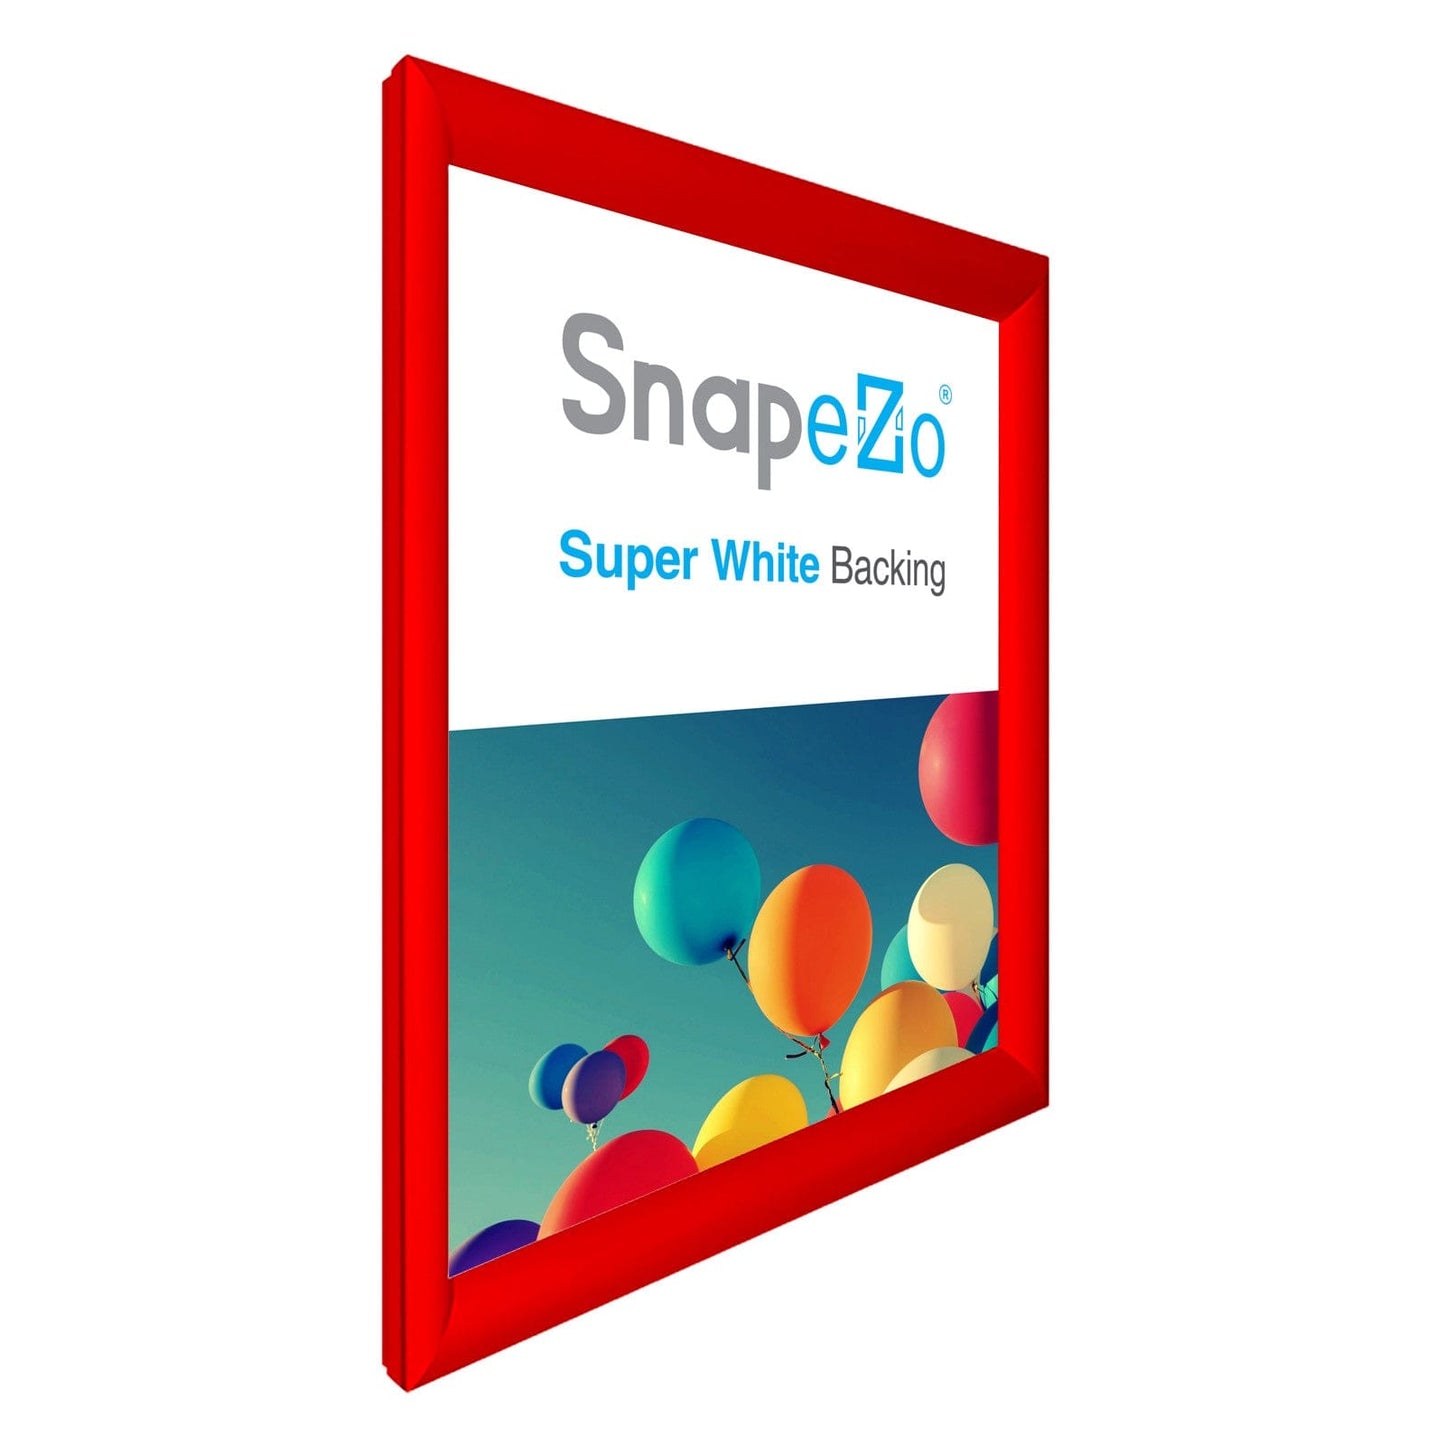 23x29 Red SnapeZo® Snap Frame - 1.2" Profile - Snap Frames Direct